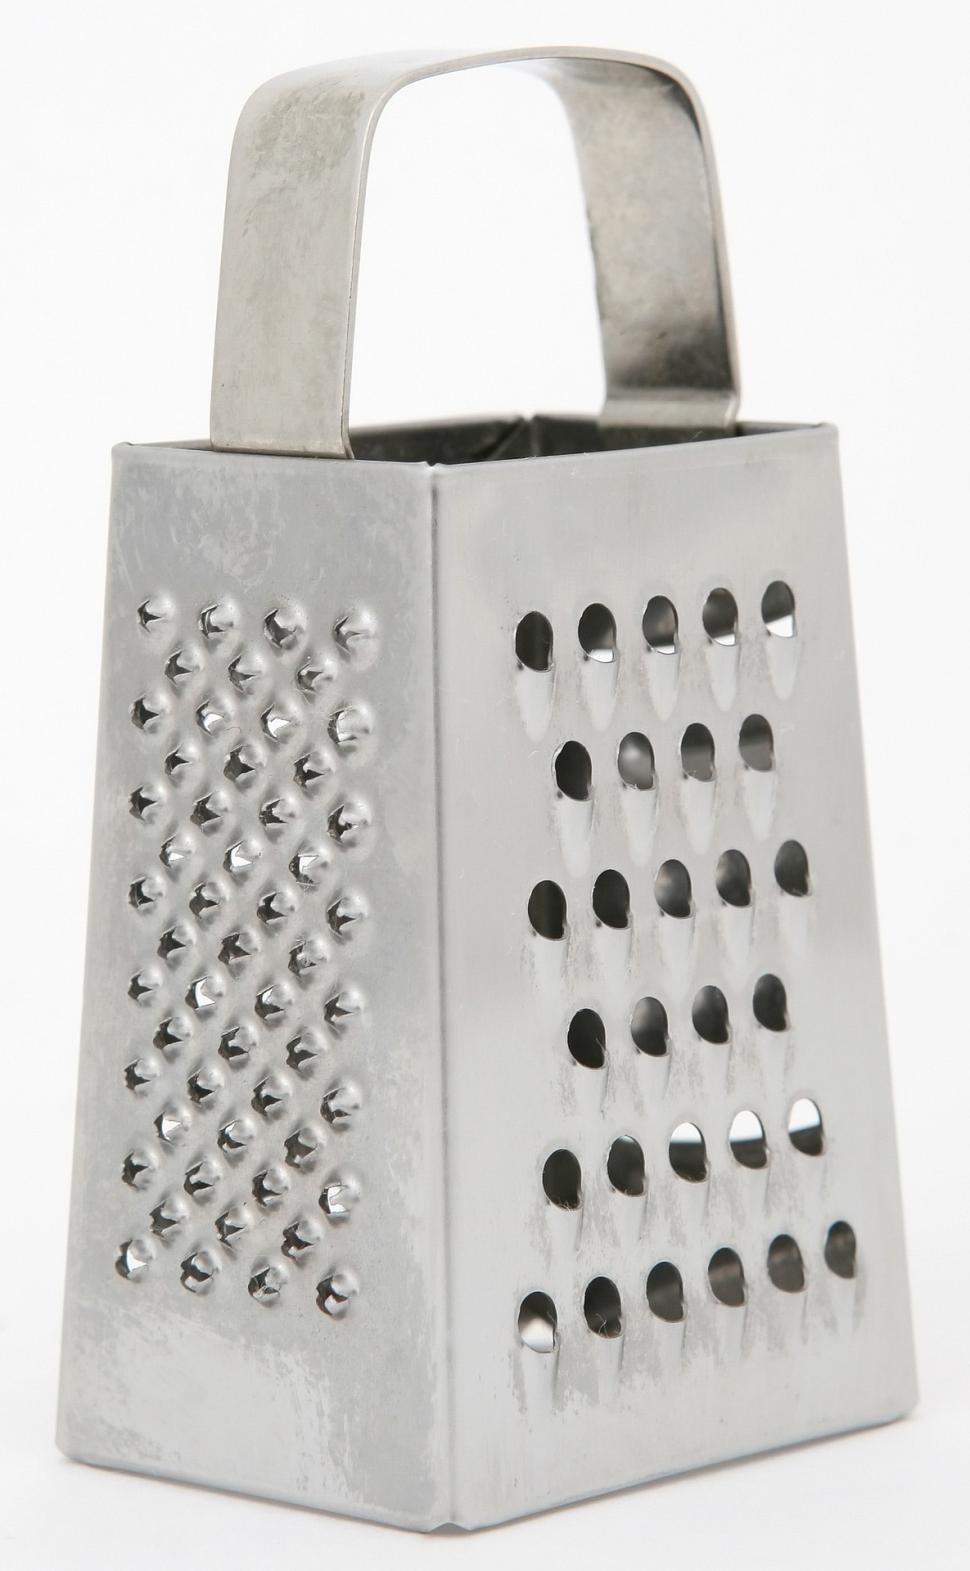 Free Image of Grater With Holes 